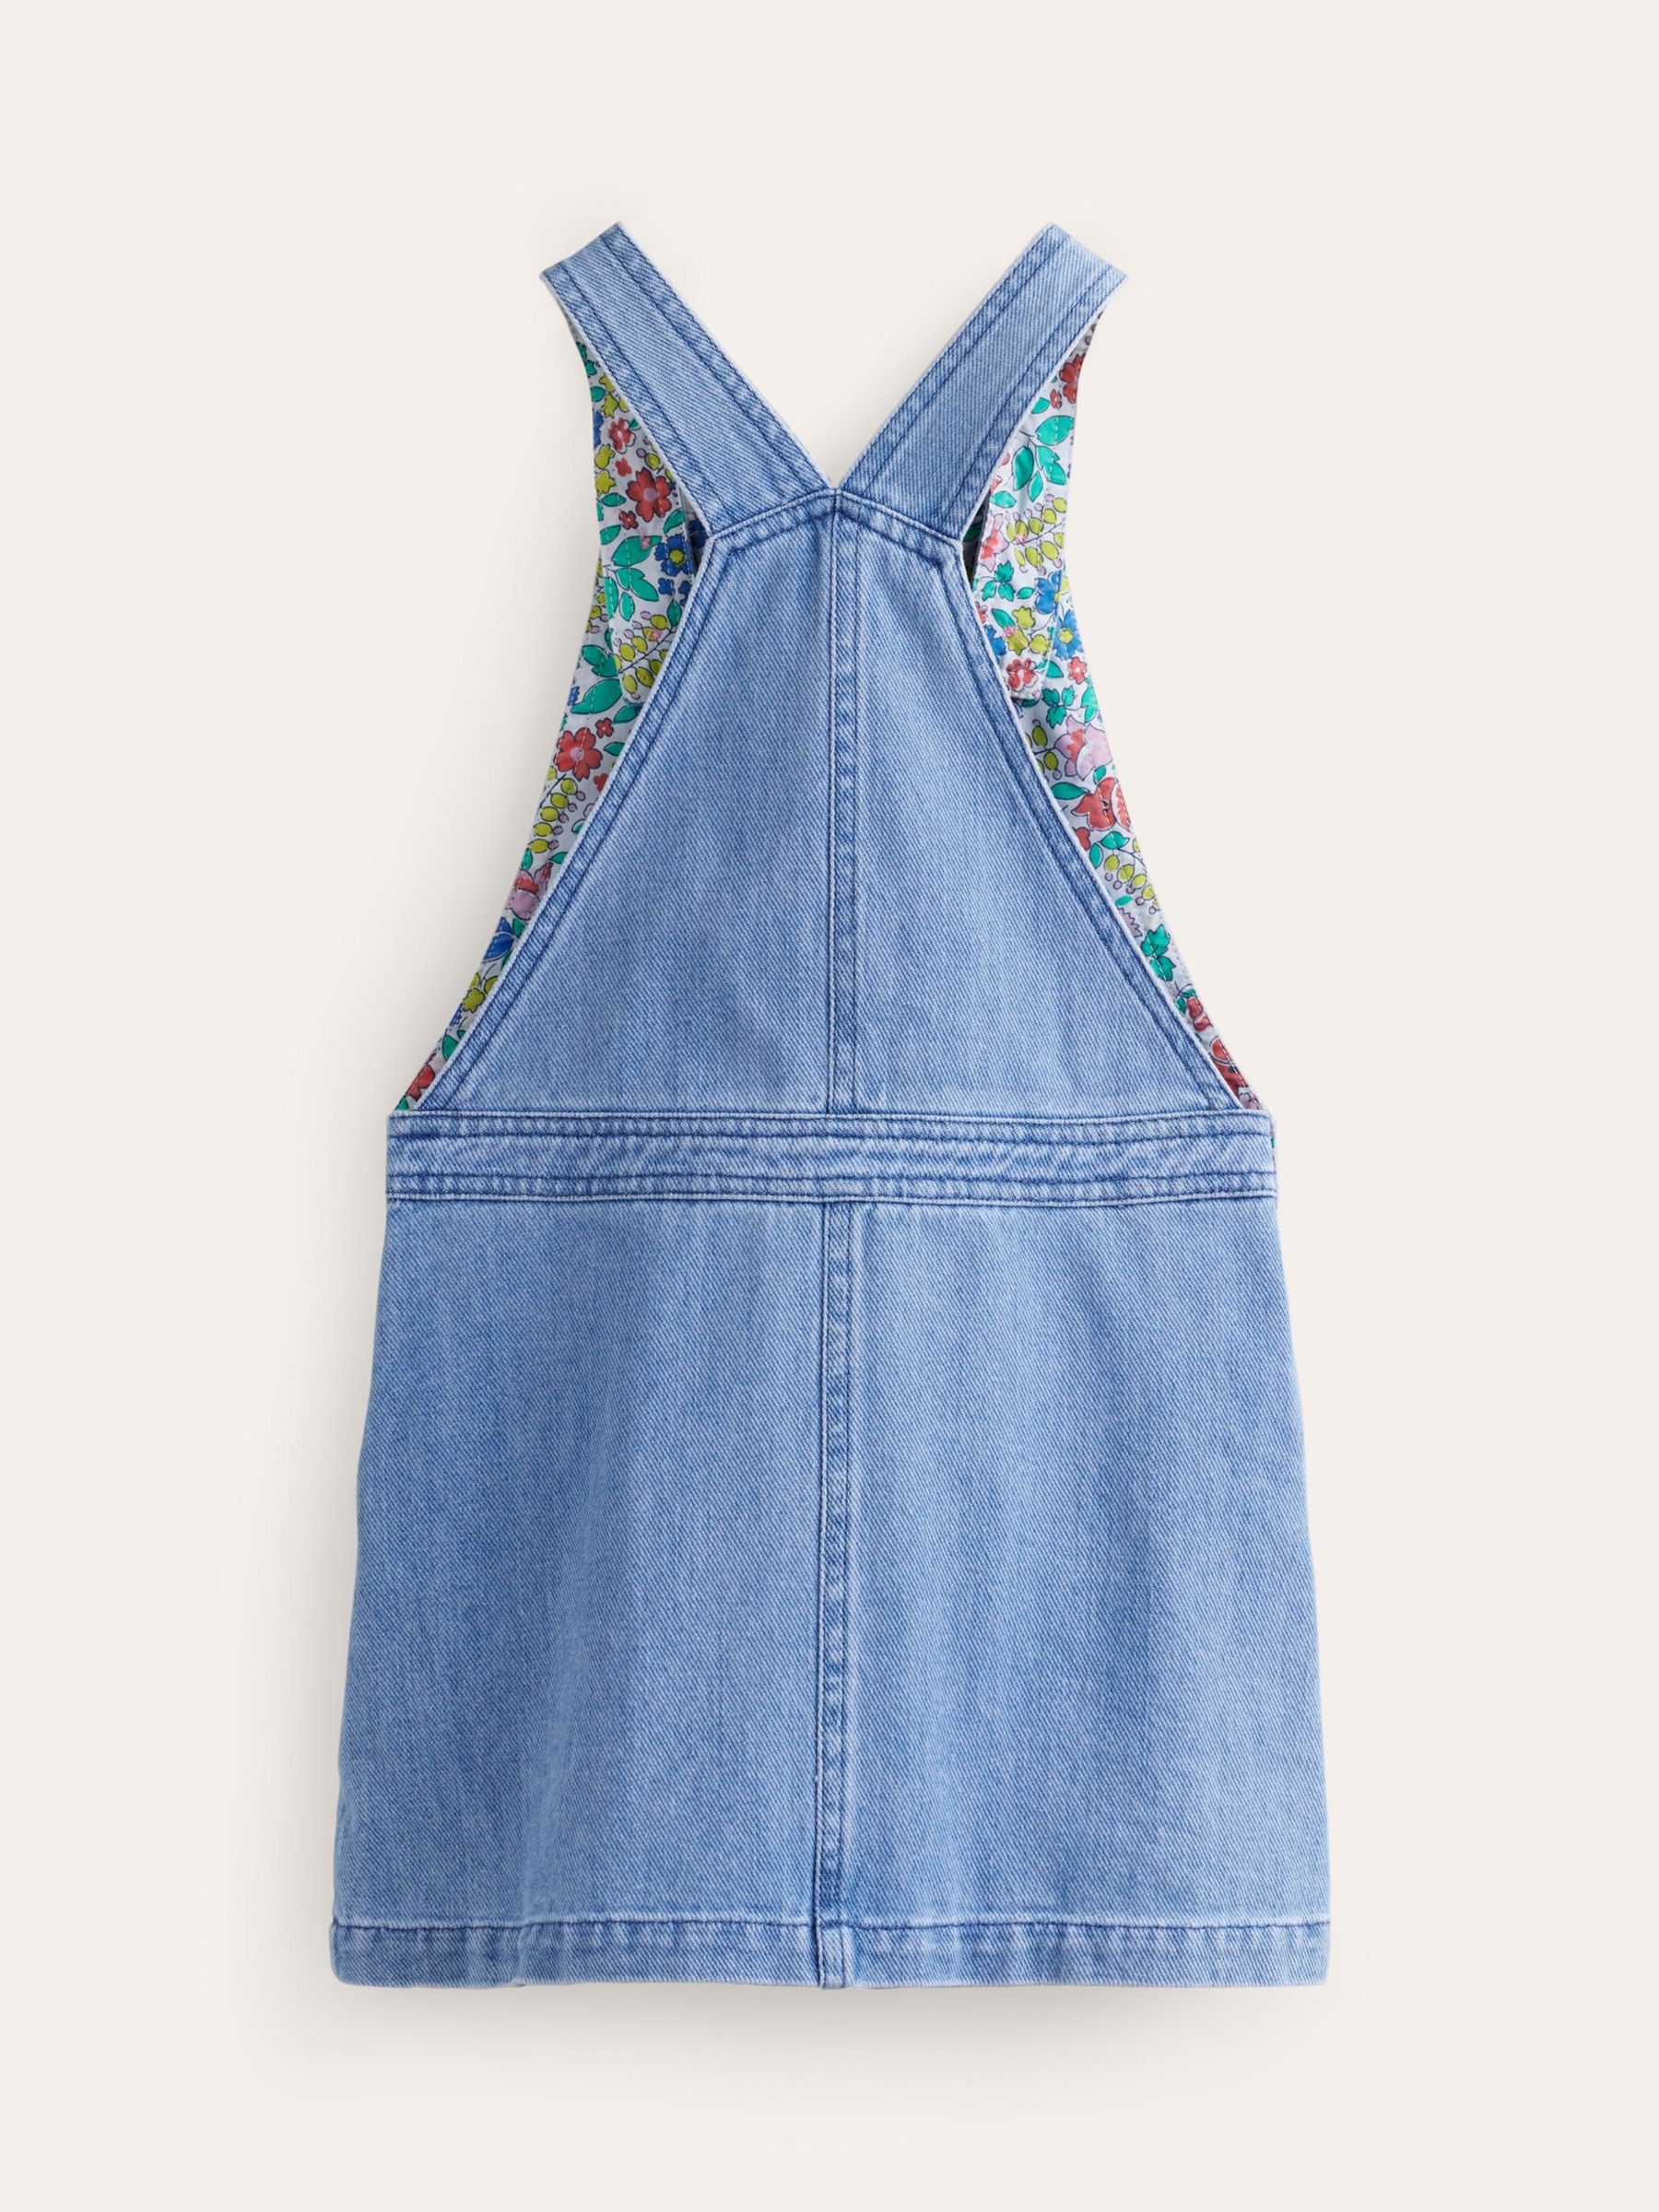 Mini Boden Kids' Relaxed Dungaree Dress, Mid Vintage Denim, 11-12 years